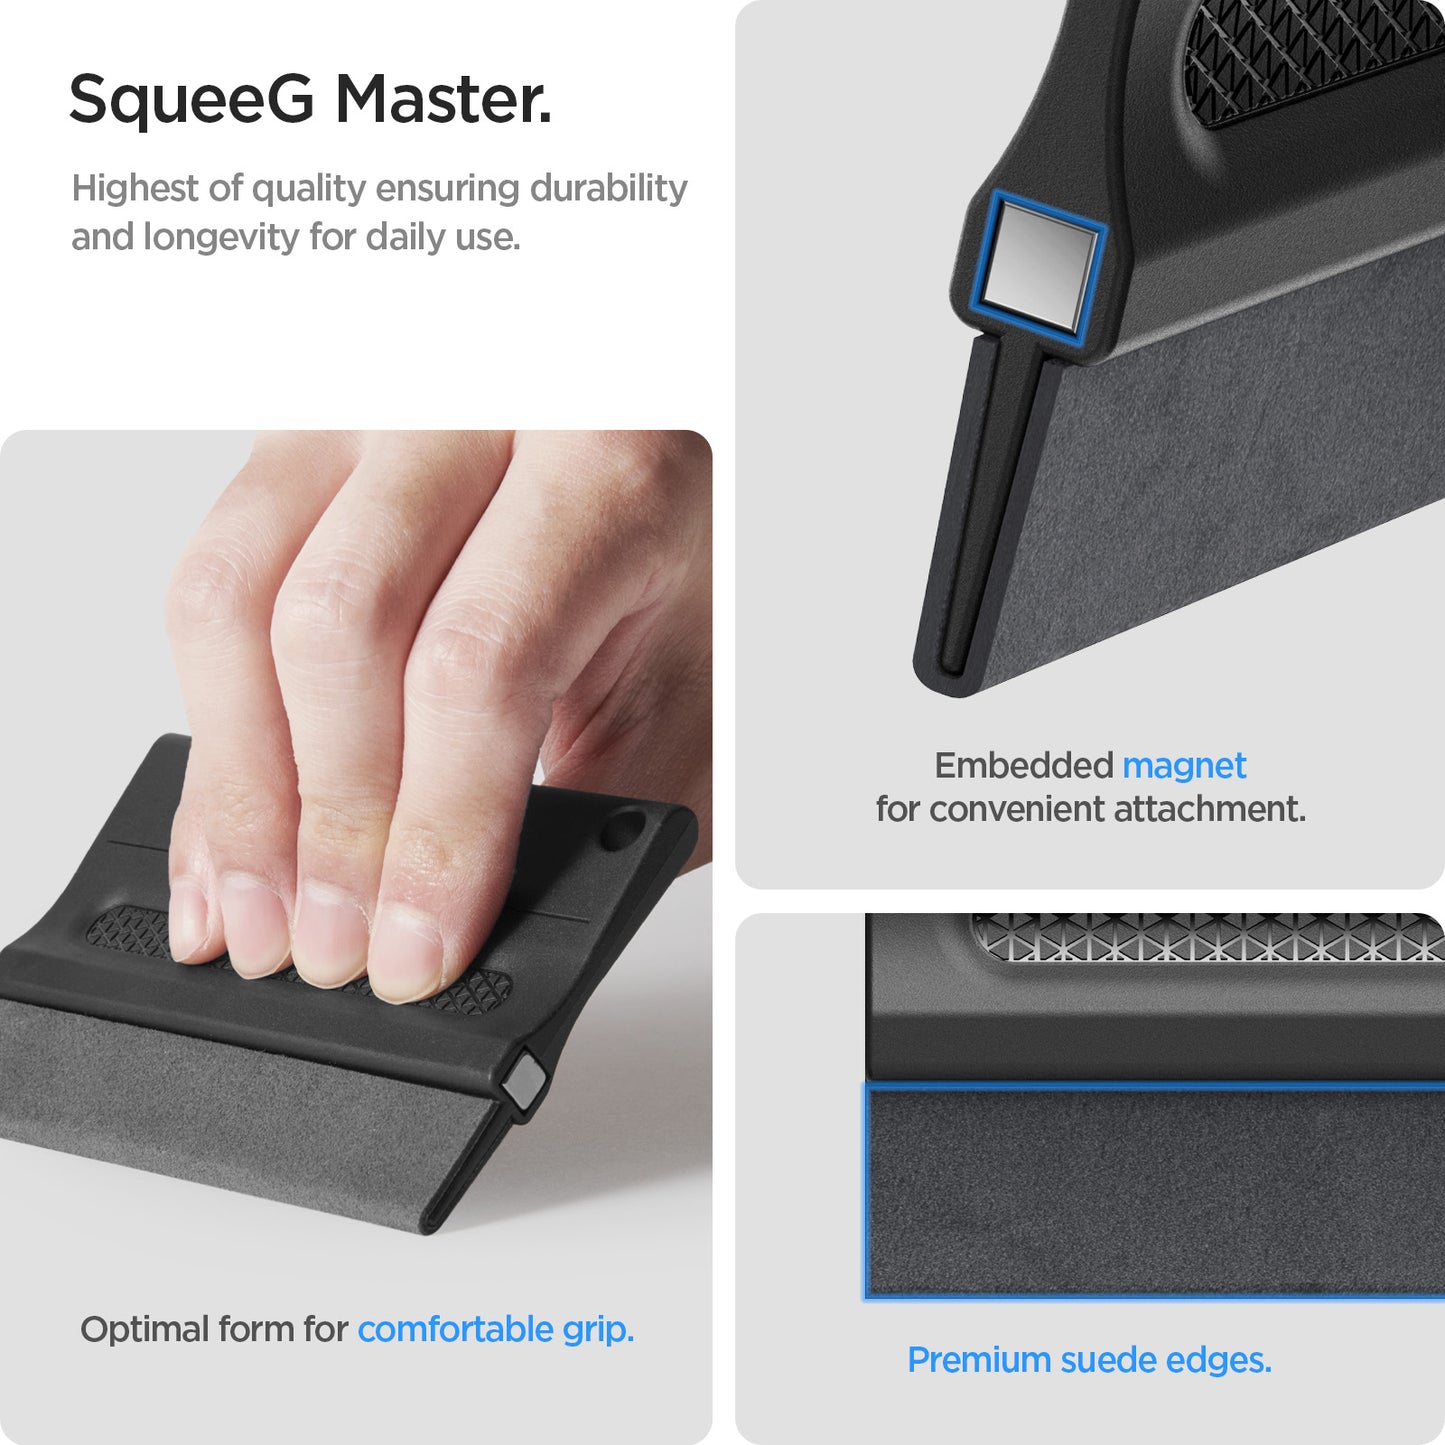 APA06854 - SqueeG Master in black showing the squeeg master. Highest of quality ensuring durability and longevity for daily use. Optimal form for comfortable grip. Embedded magnet for convenient attachment and premium suede edges.